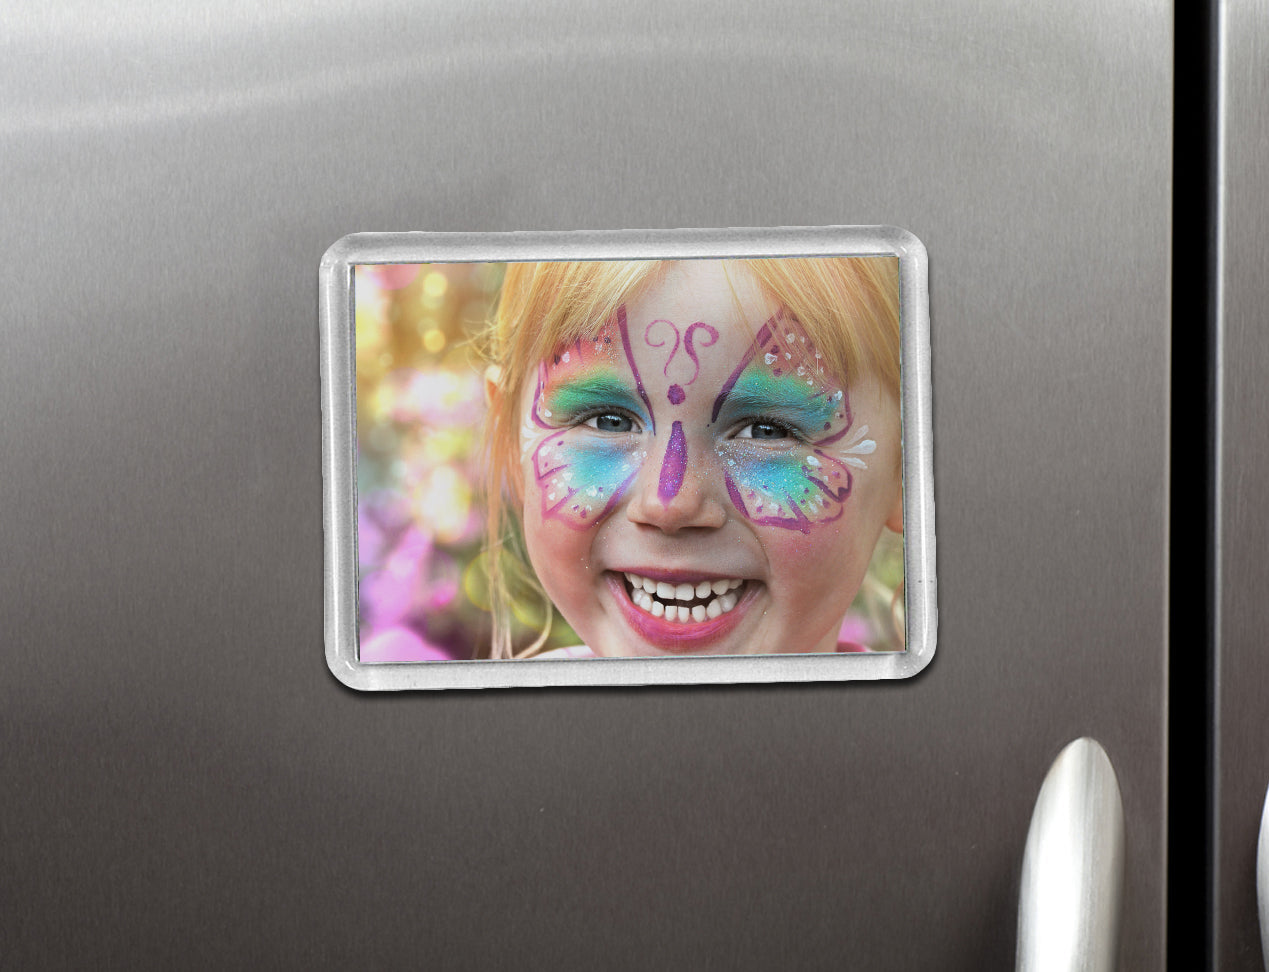 Acrylic Photo Magnet with kids picture, positioned on fridge.